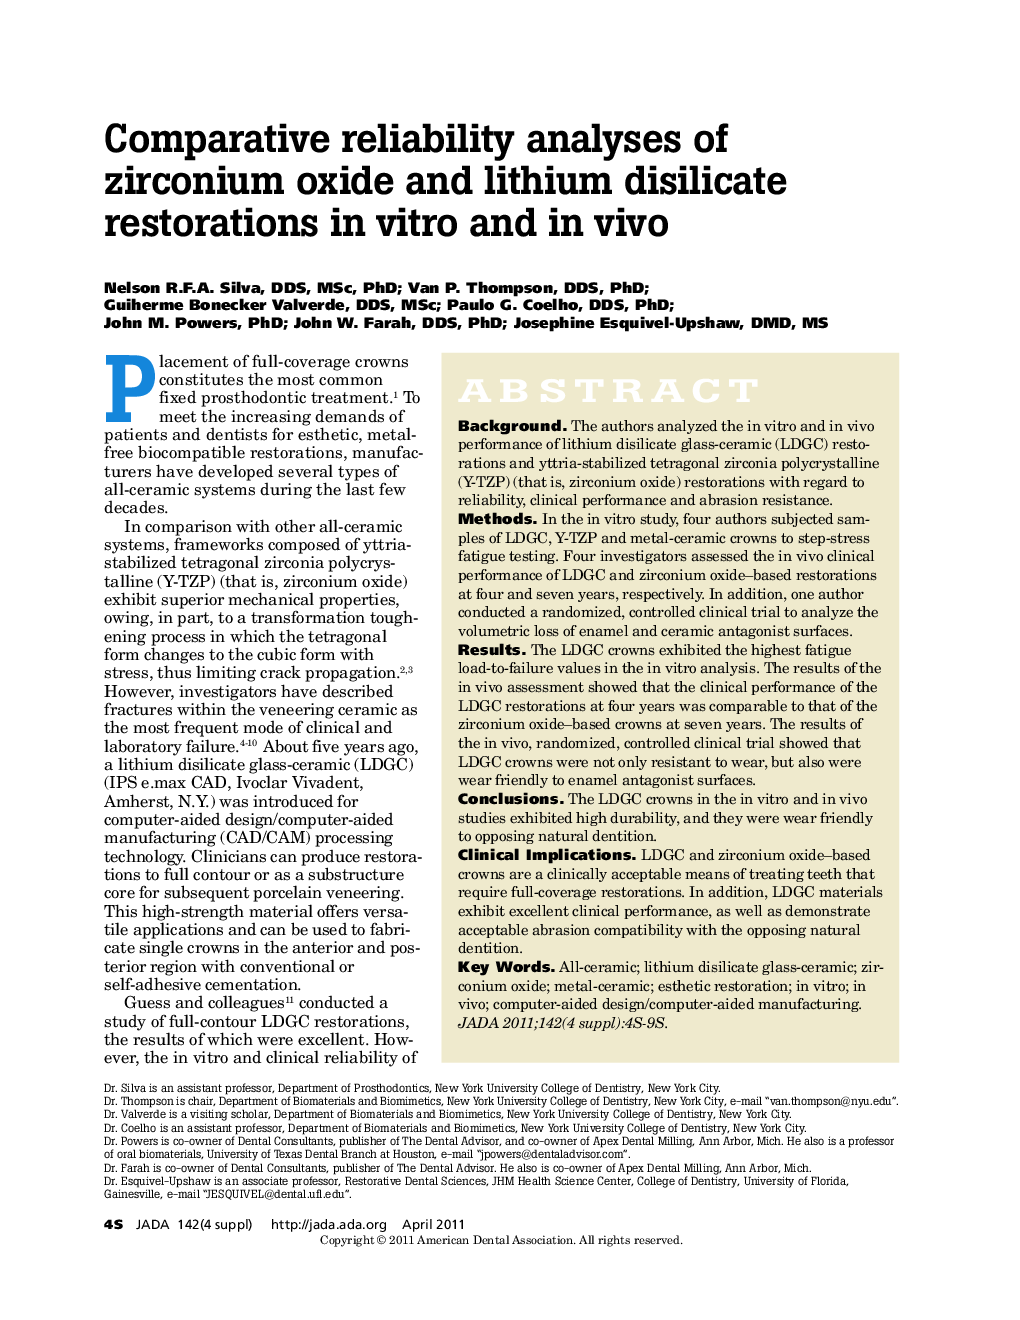 Comparative reliability analyses of zirconium oxide and lithium disilicate restorations in vitro and in vivo